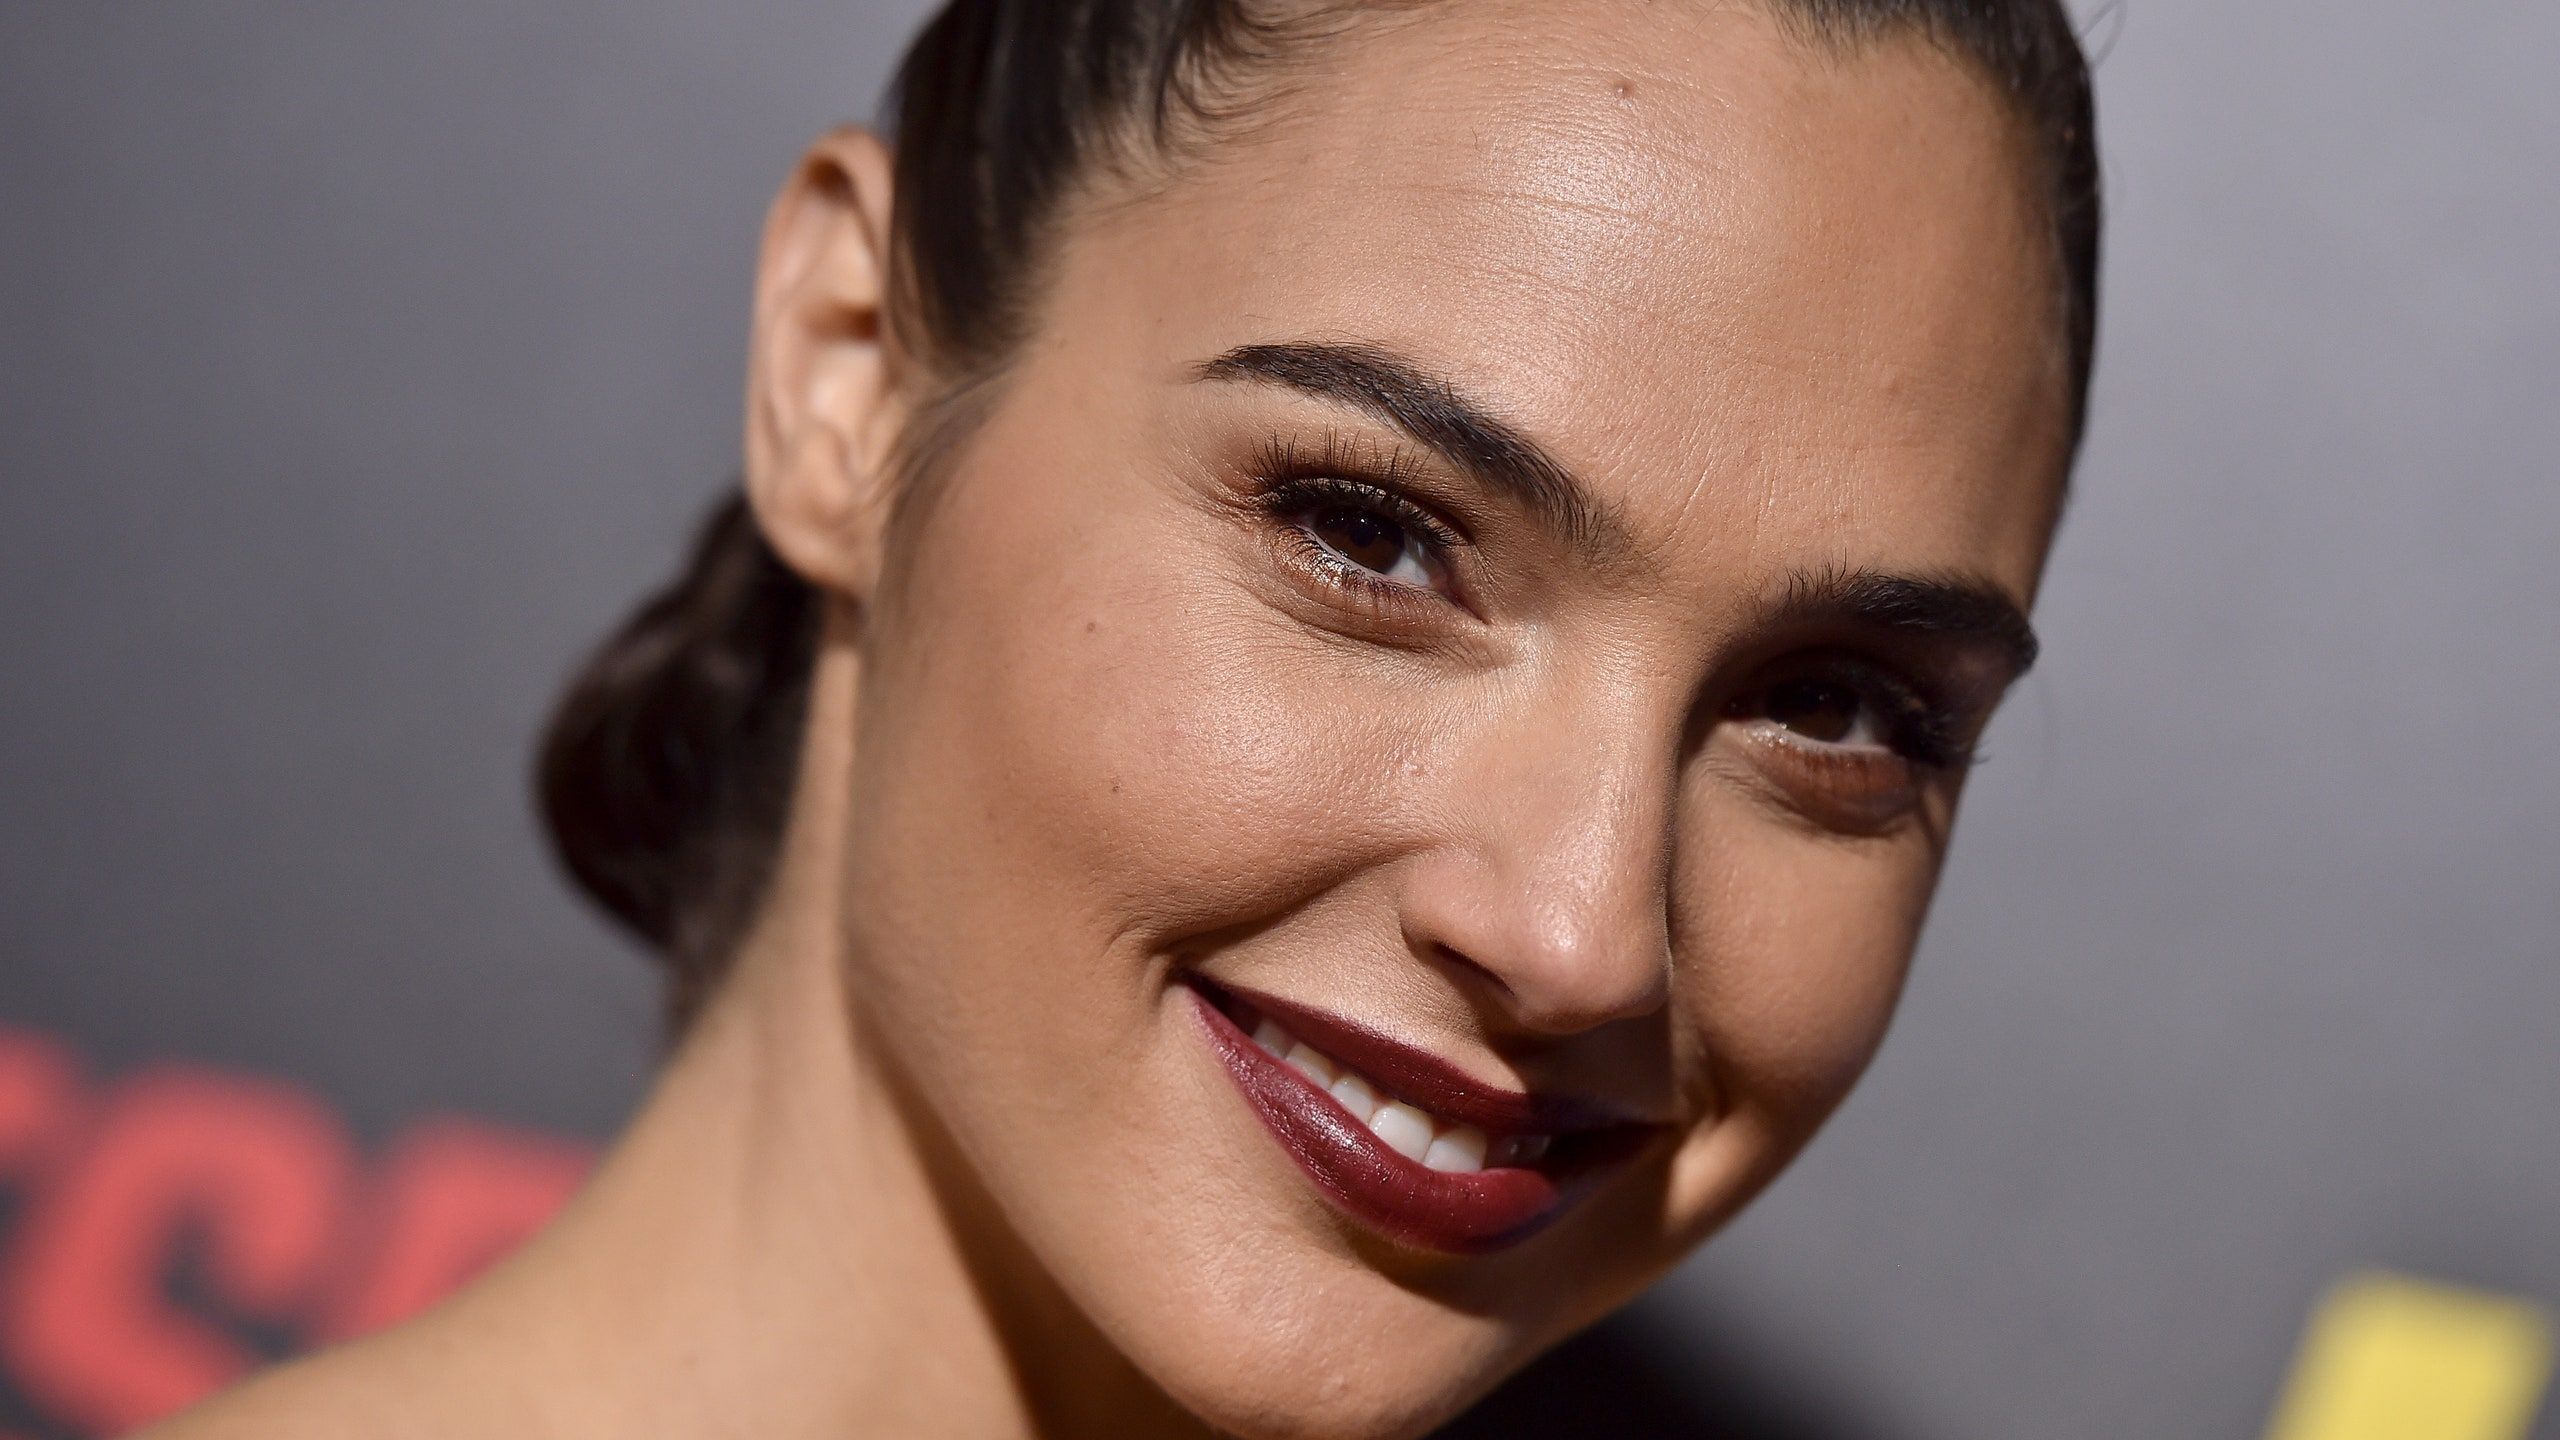 Wonder Woman Gal Gadot Is Expecting Baby Number Two!